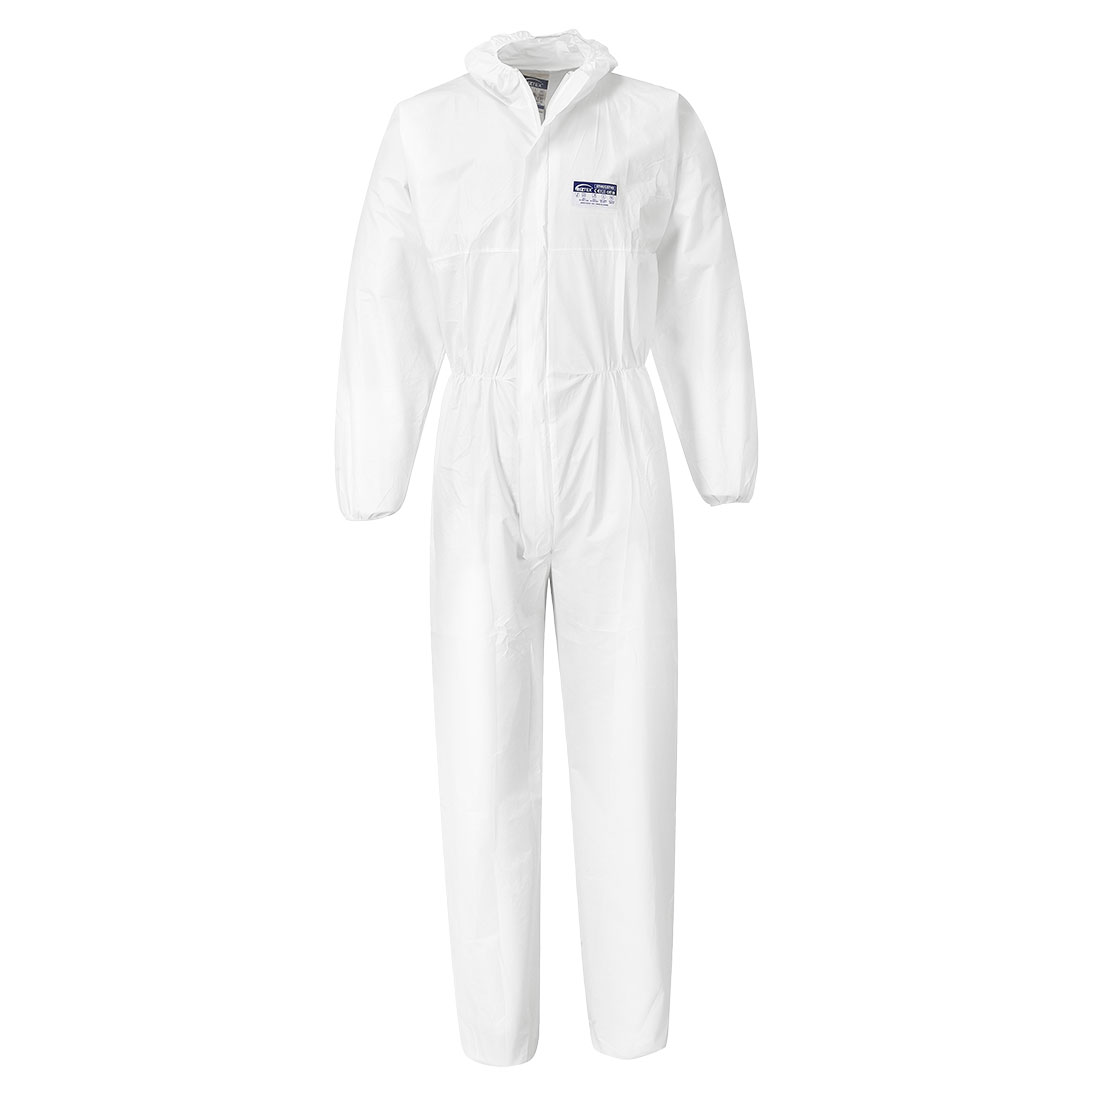 Portwest BizTex Microporous Coverall Type 5/6 White ST40 from Columbia Safety